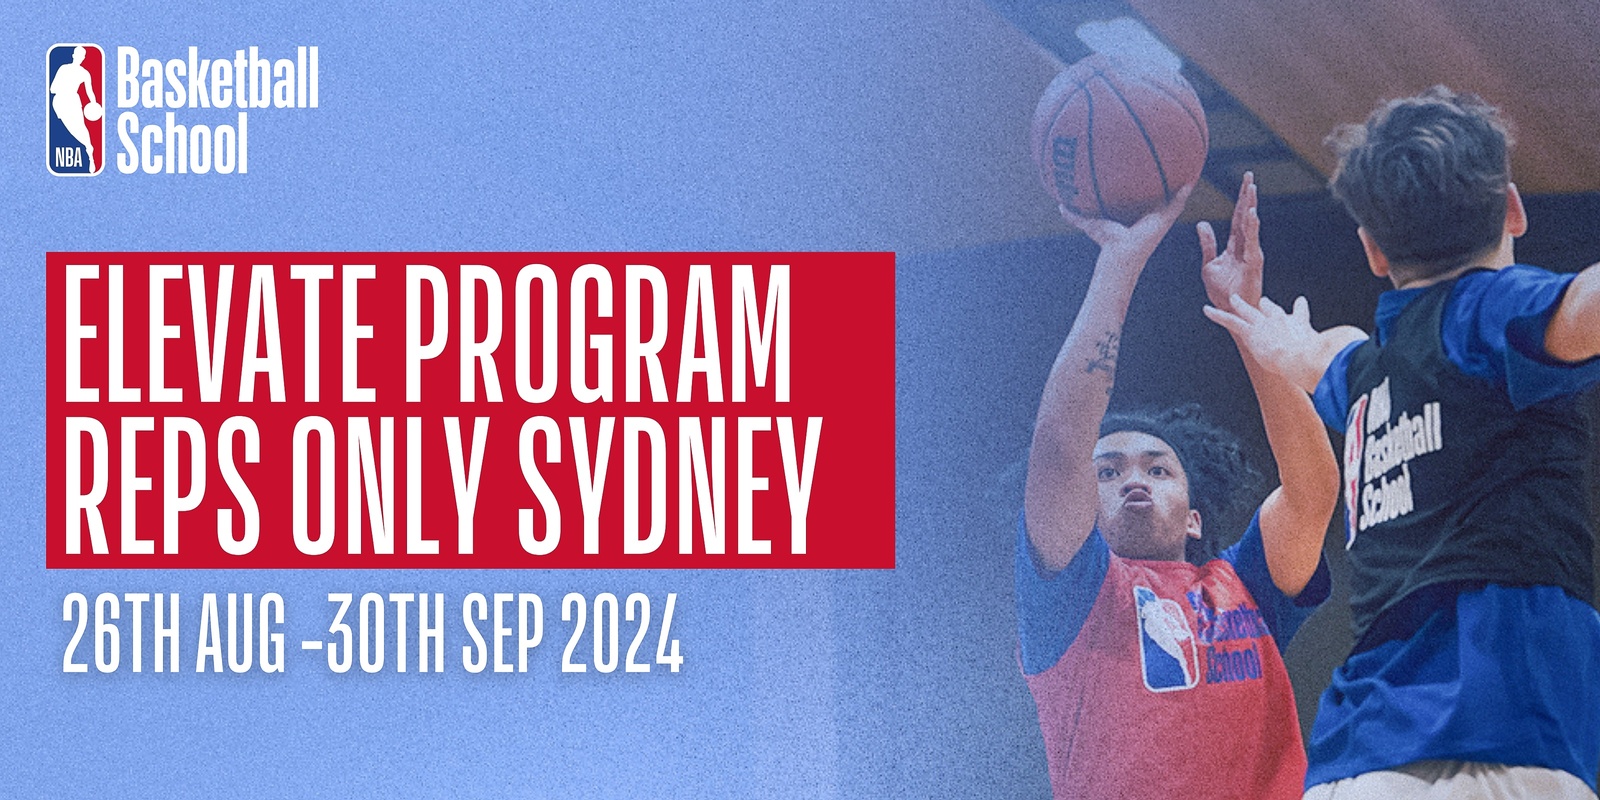 Banner image for Elevate Reps Only Program in Sydney at NBA Basketball School Australia 2024